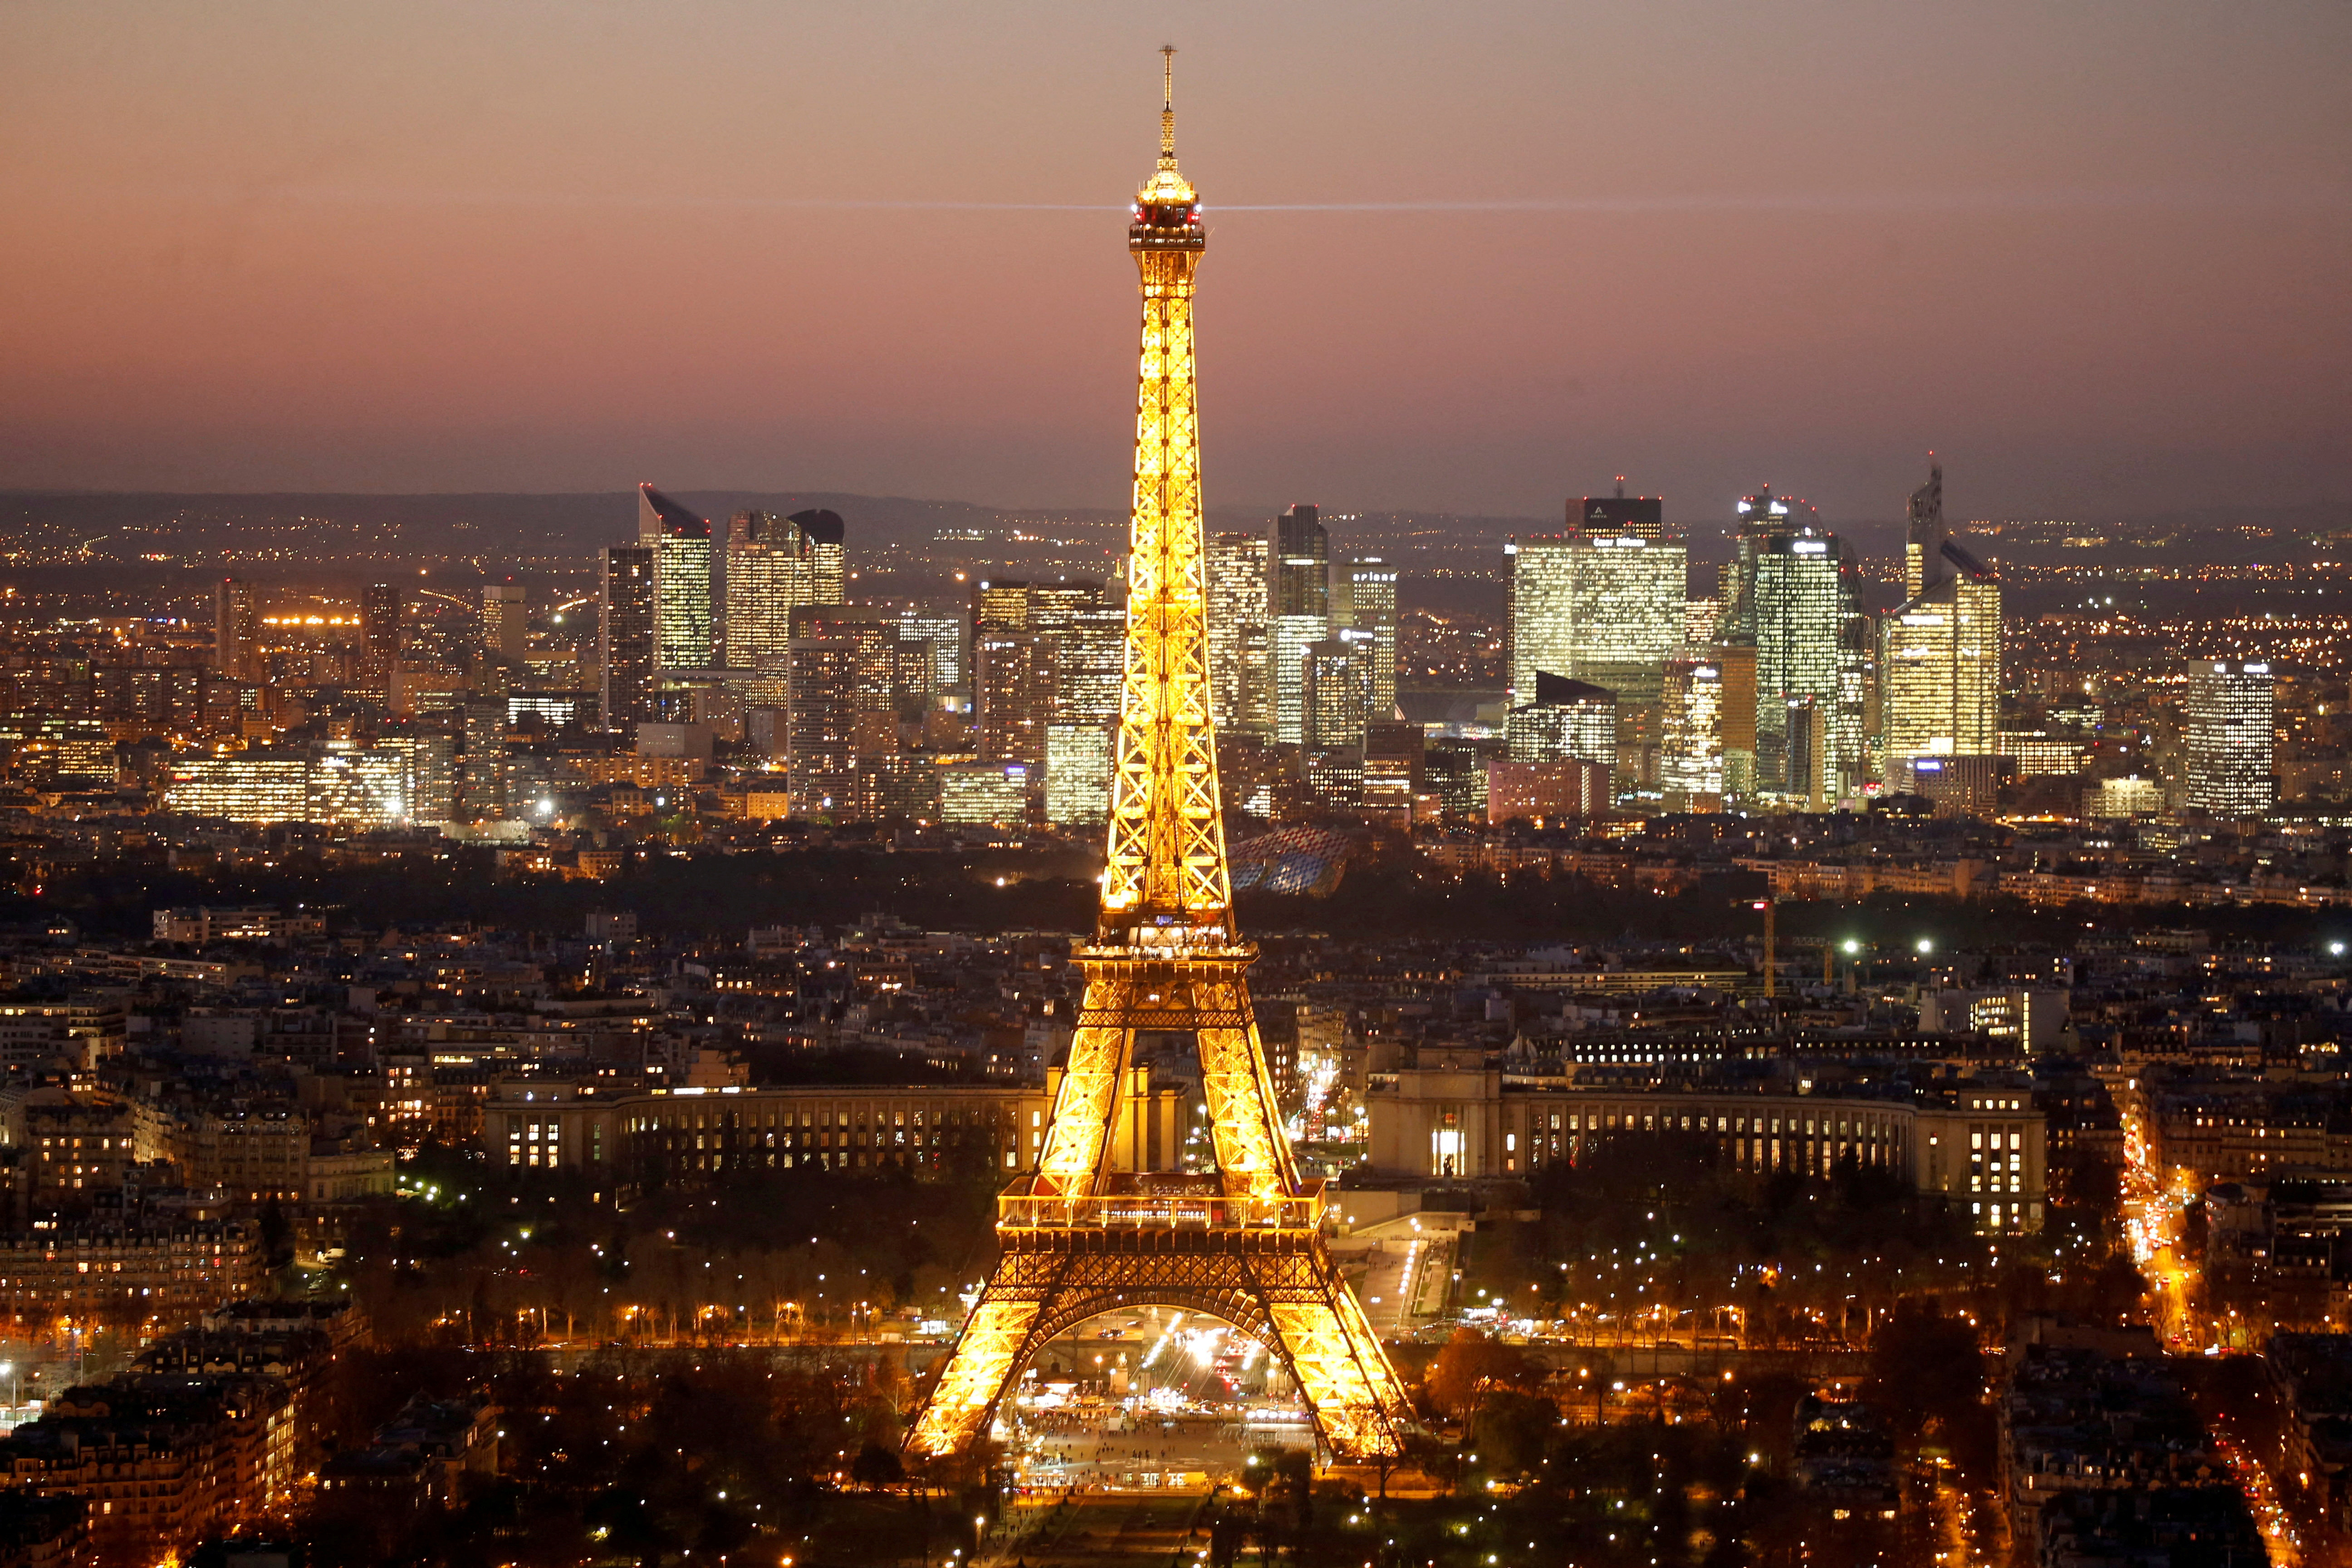 A general view show the illuminated Eiffel Tower and the skyline of La Defense business district at night in Paris